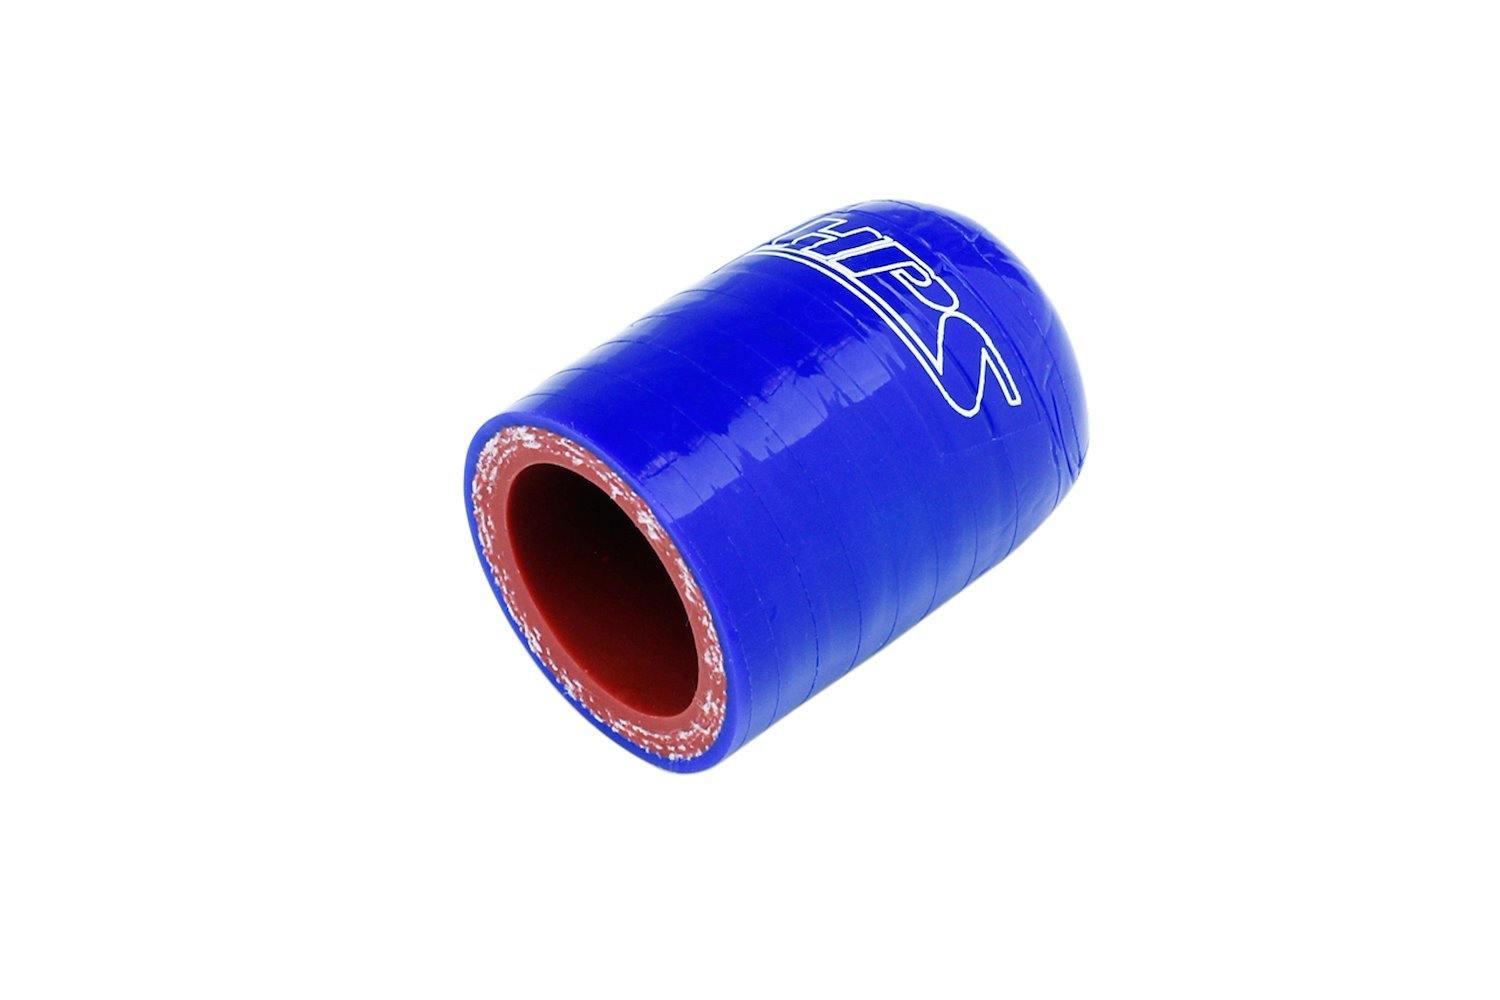 RSCC-106-BLUE Coolant Bypass Cap, 3-Ply Reinforced High-Temp. Silicone Bypass Cap, 1-1/16 in. ID, Blue